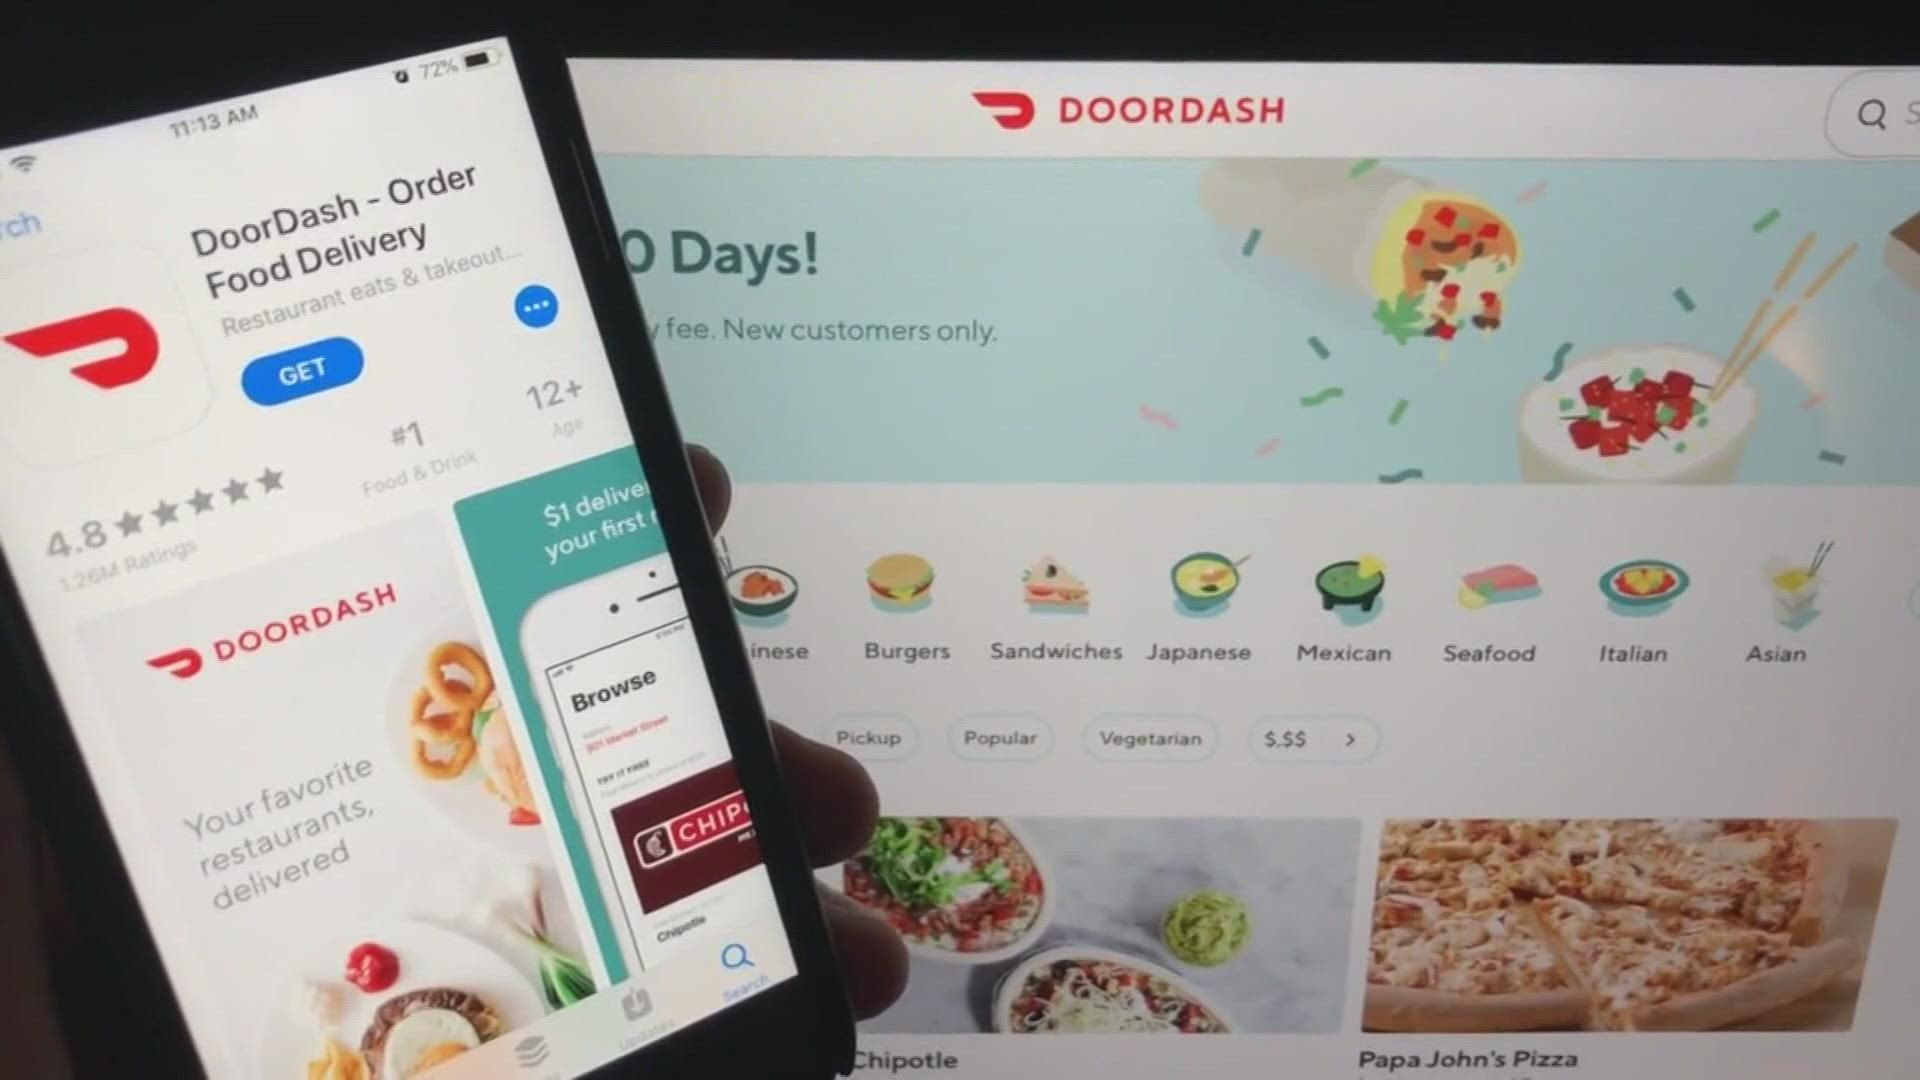 Ryan Frazier shares relevant insights from DoorDash's latest economic report.